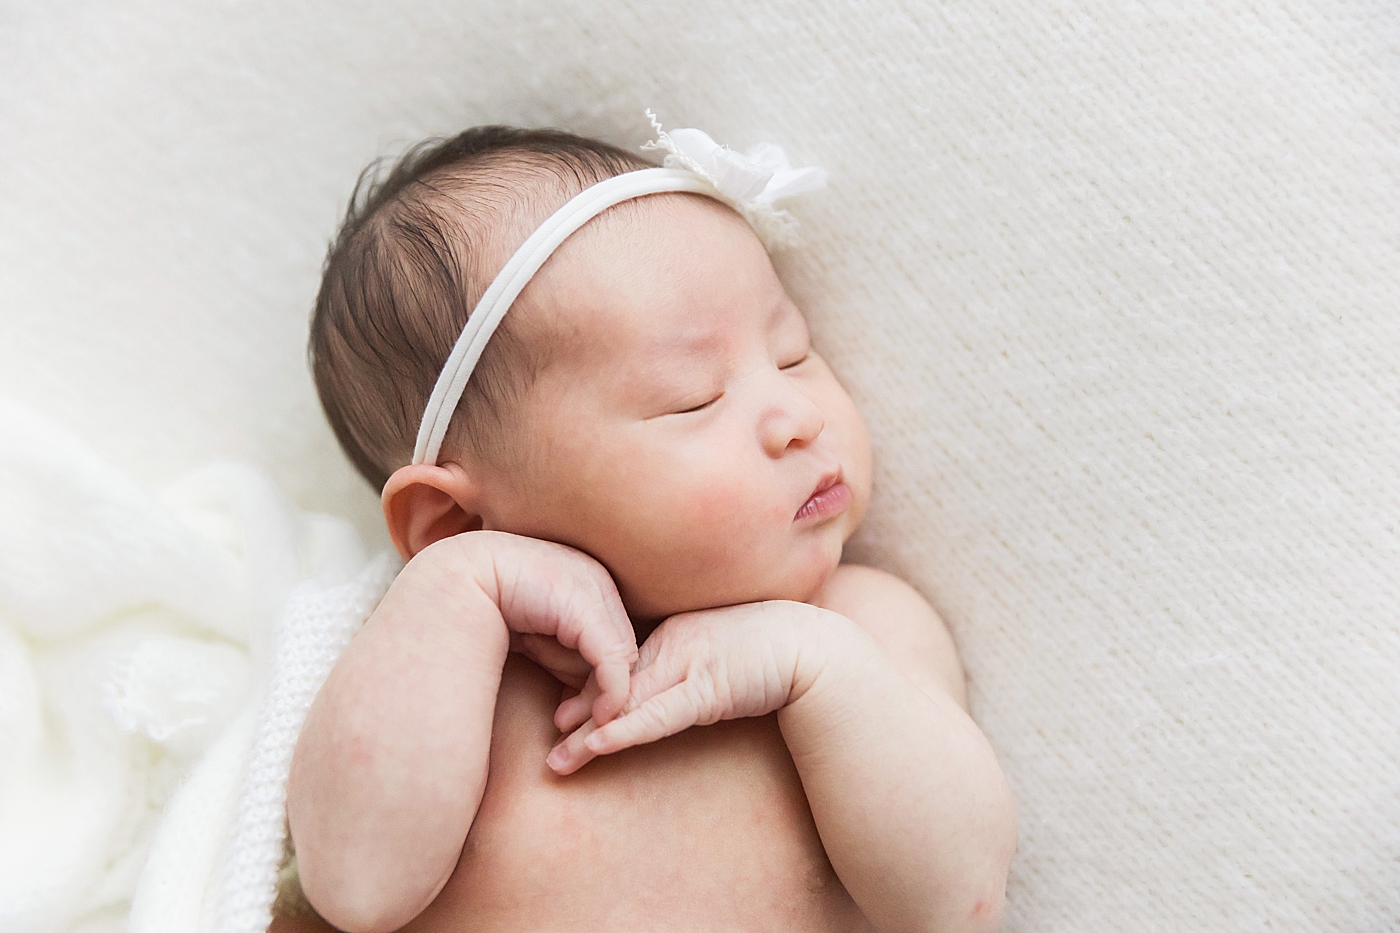 Baby girl with her hands curled up by her face. Photo by Fresh Light Photography.